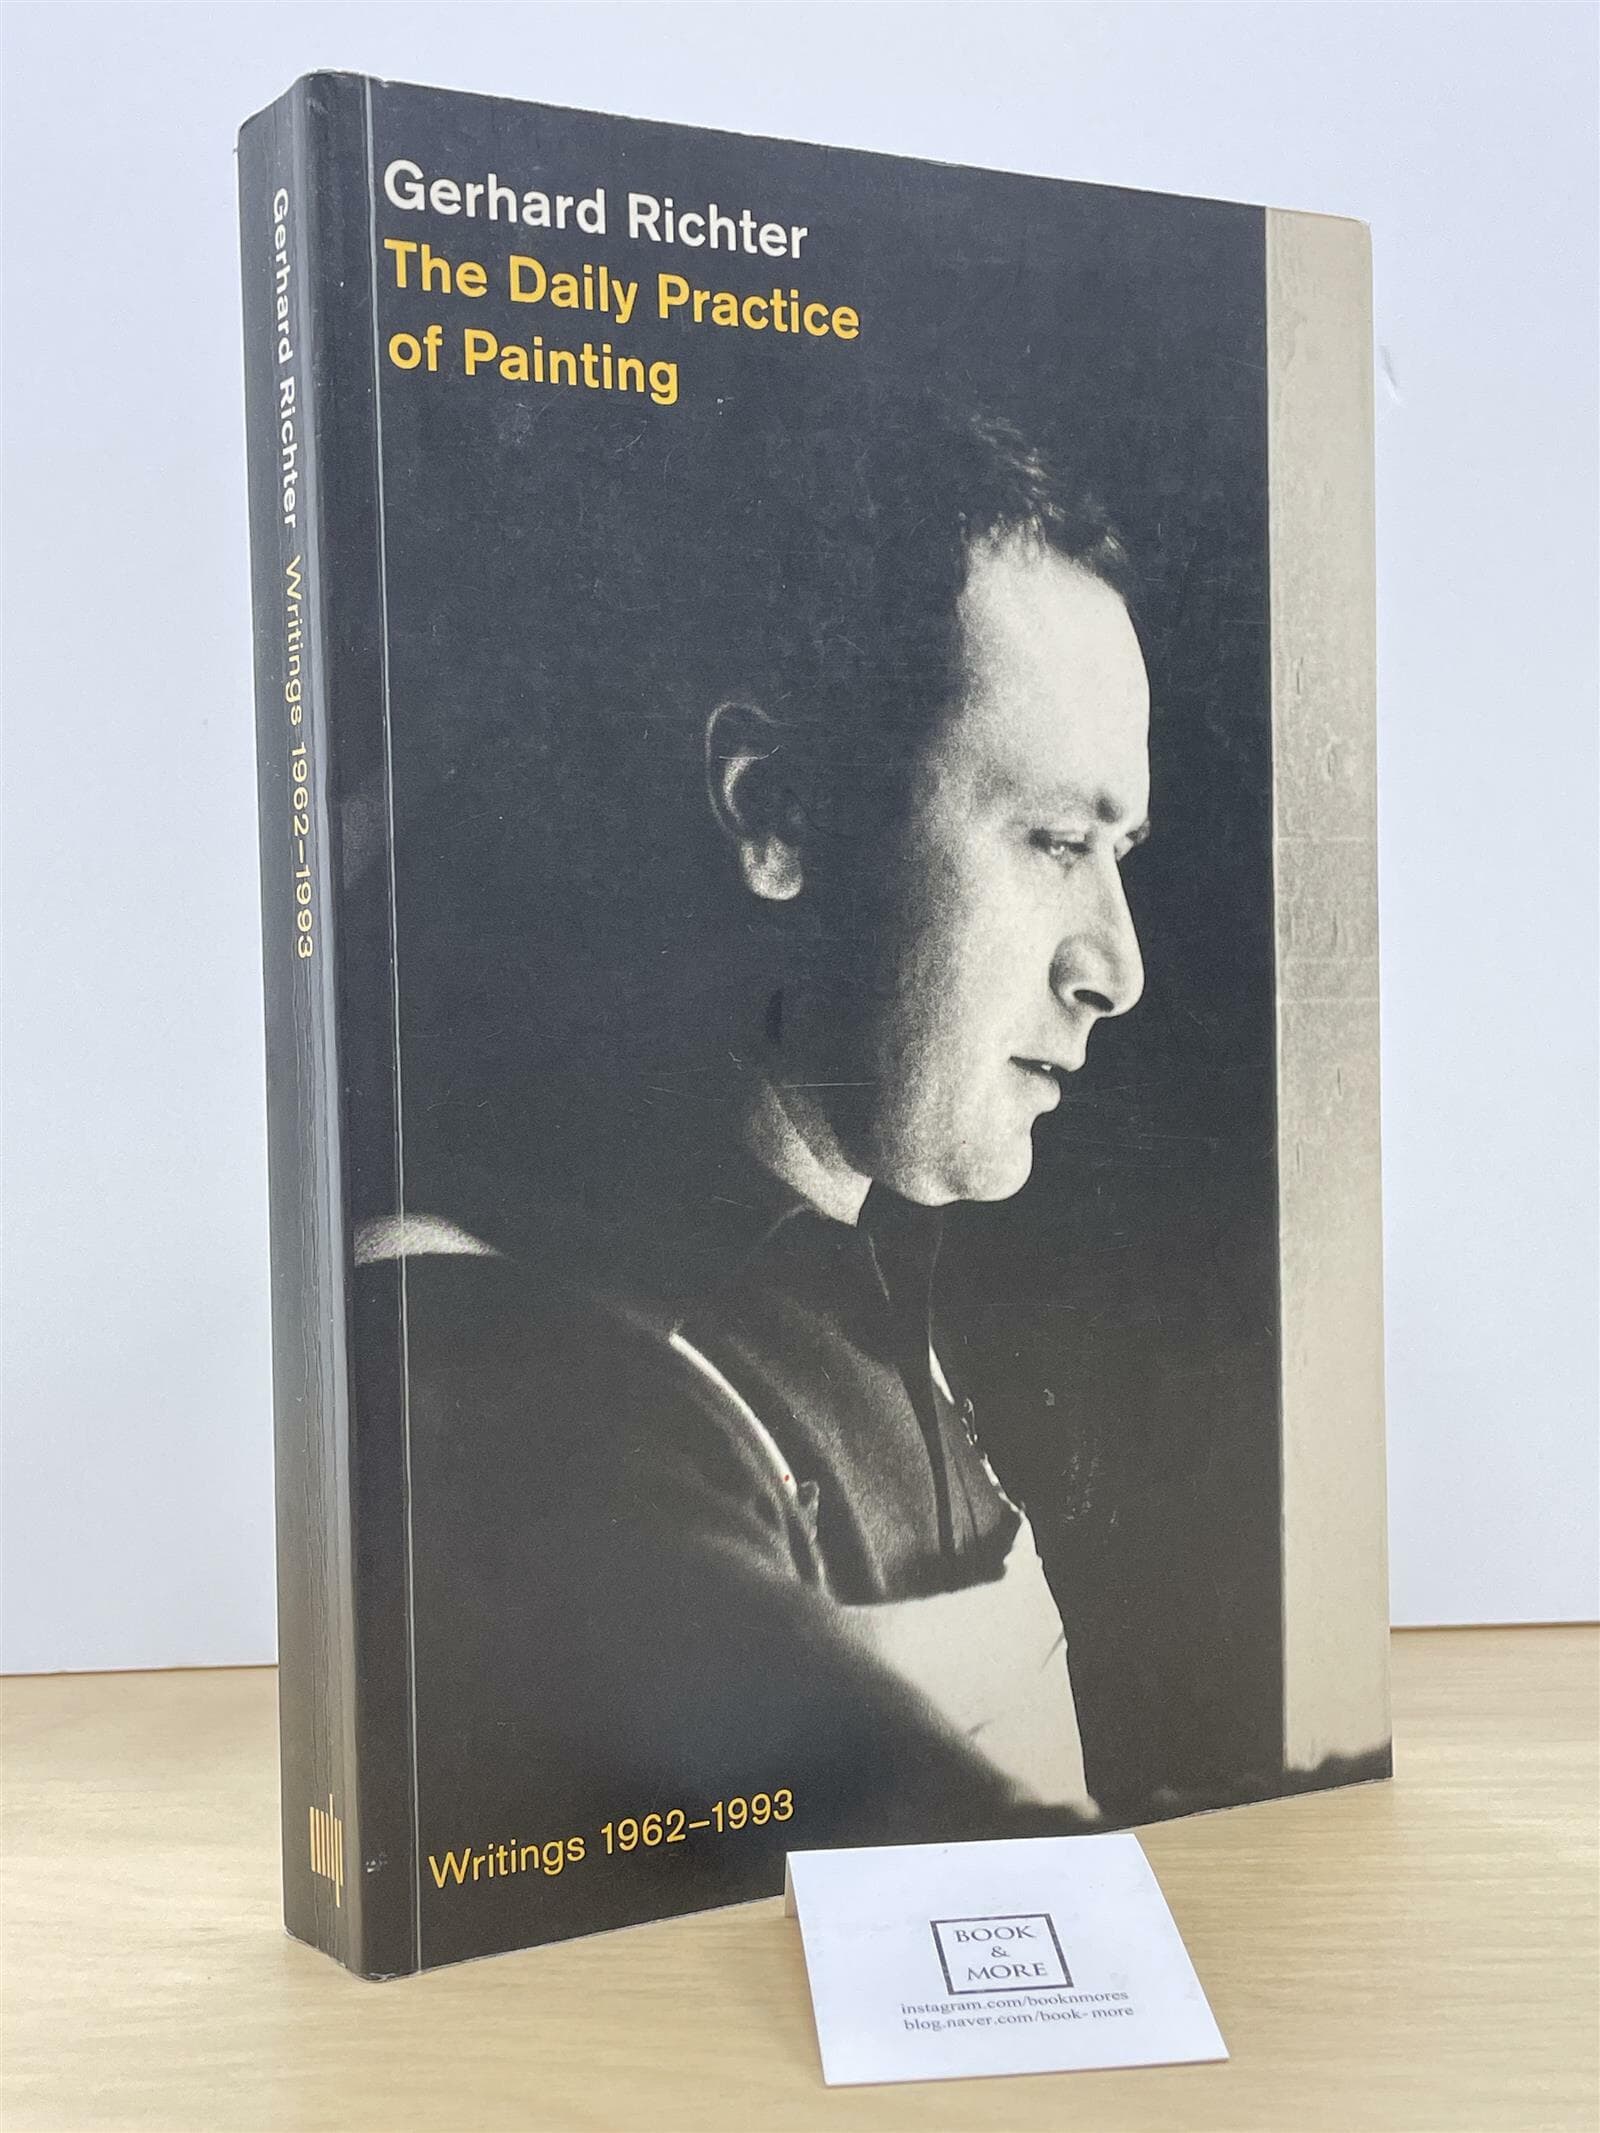 The Daily Practice of Painting / Gerhard Richter / Hans-Ulrich Obrist   --  상태 : 상급